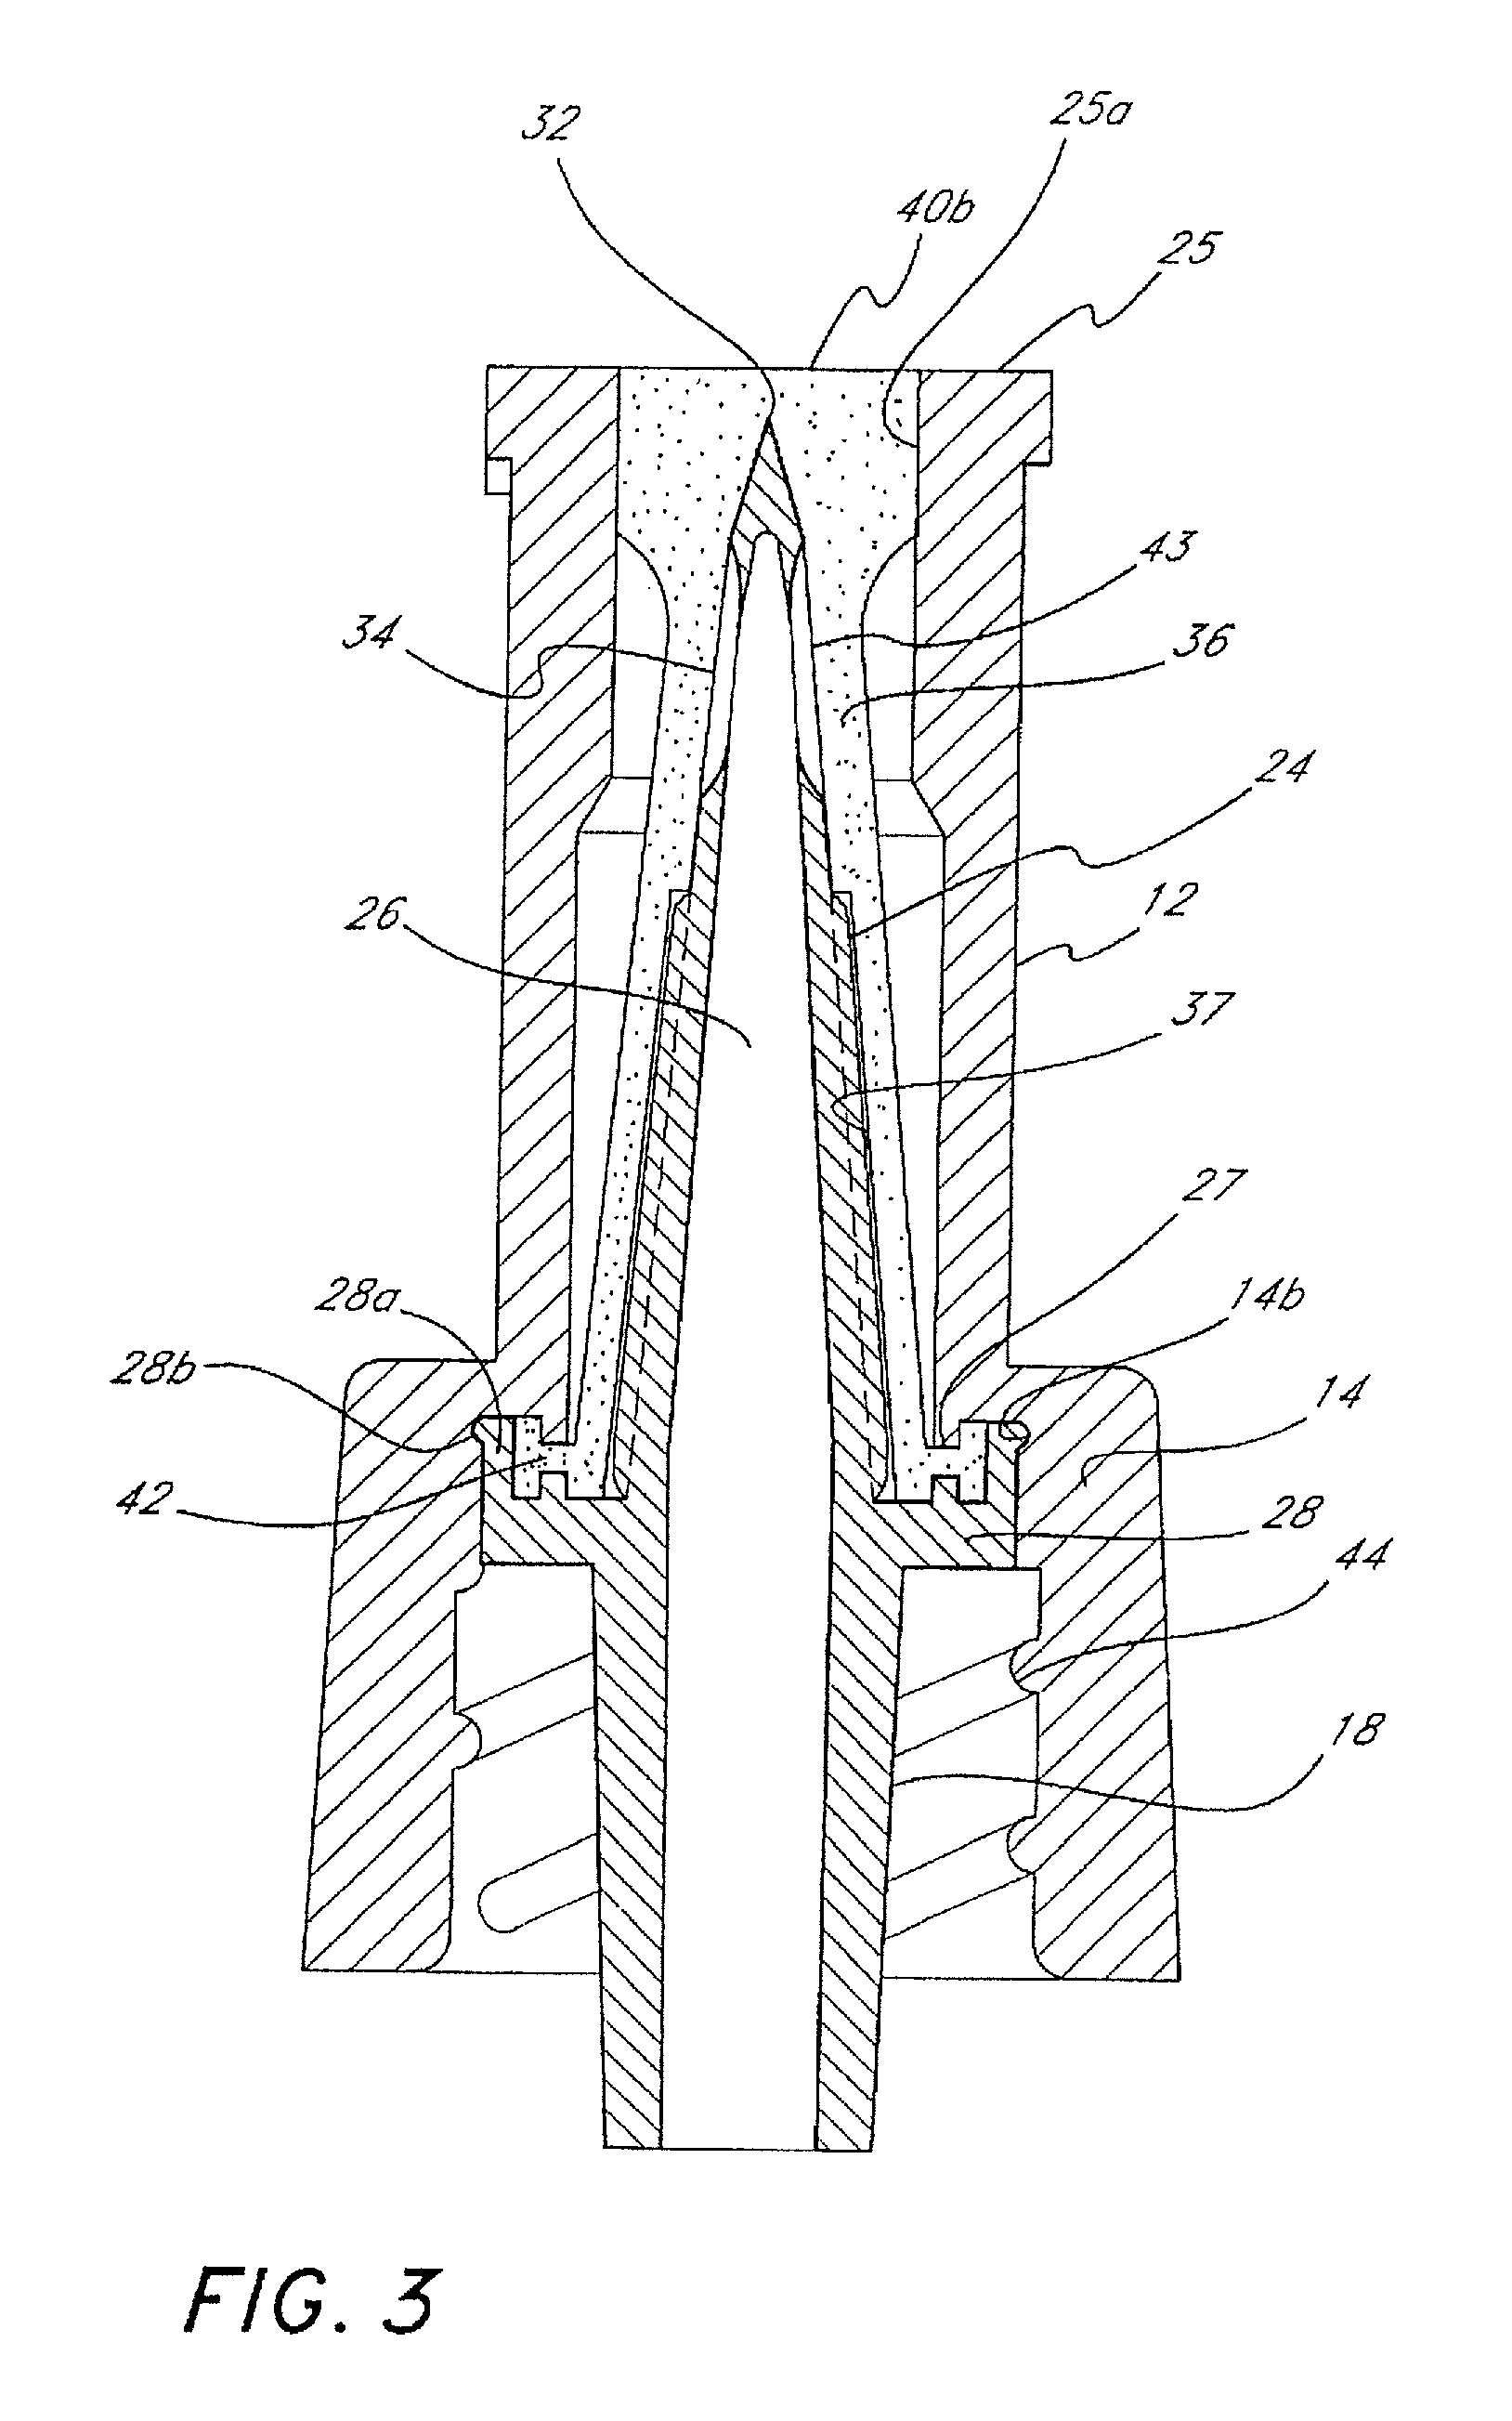 Intravenous connector having antimicrobial treatment